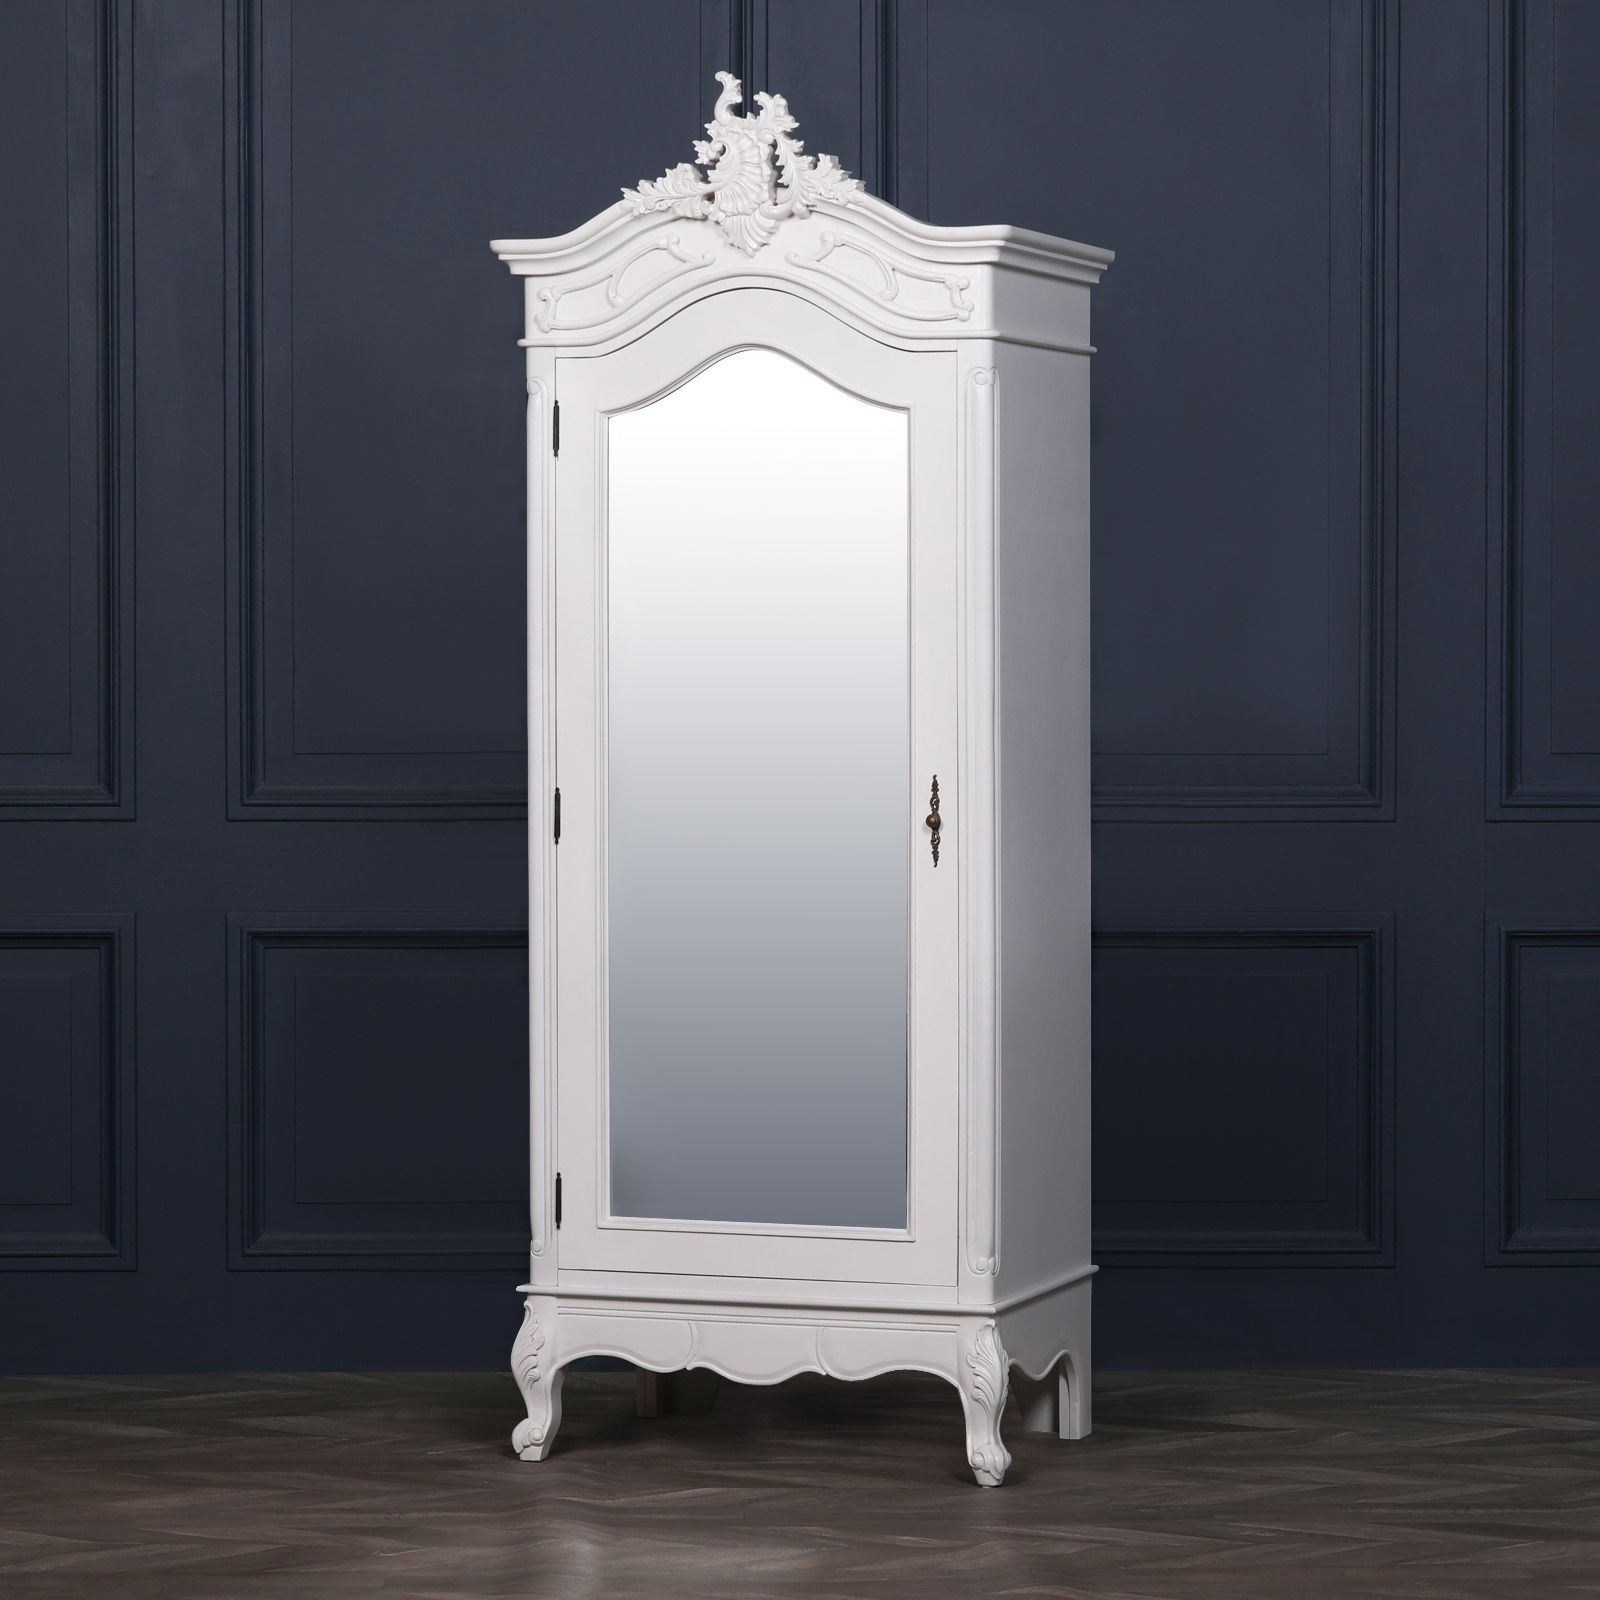 Hand Carved French White Single Armoire Wardrobe Mirror Door Regarding Single White Wardrobes With Mirror (Gallery 4 of 20)